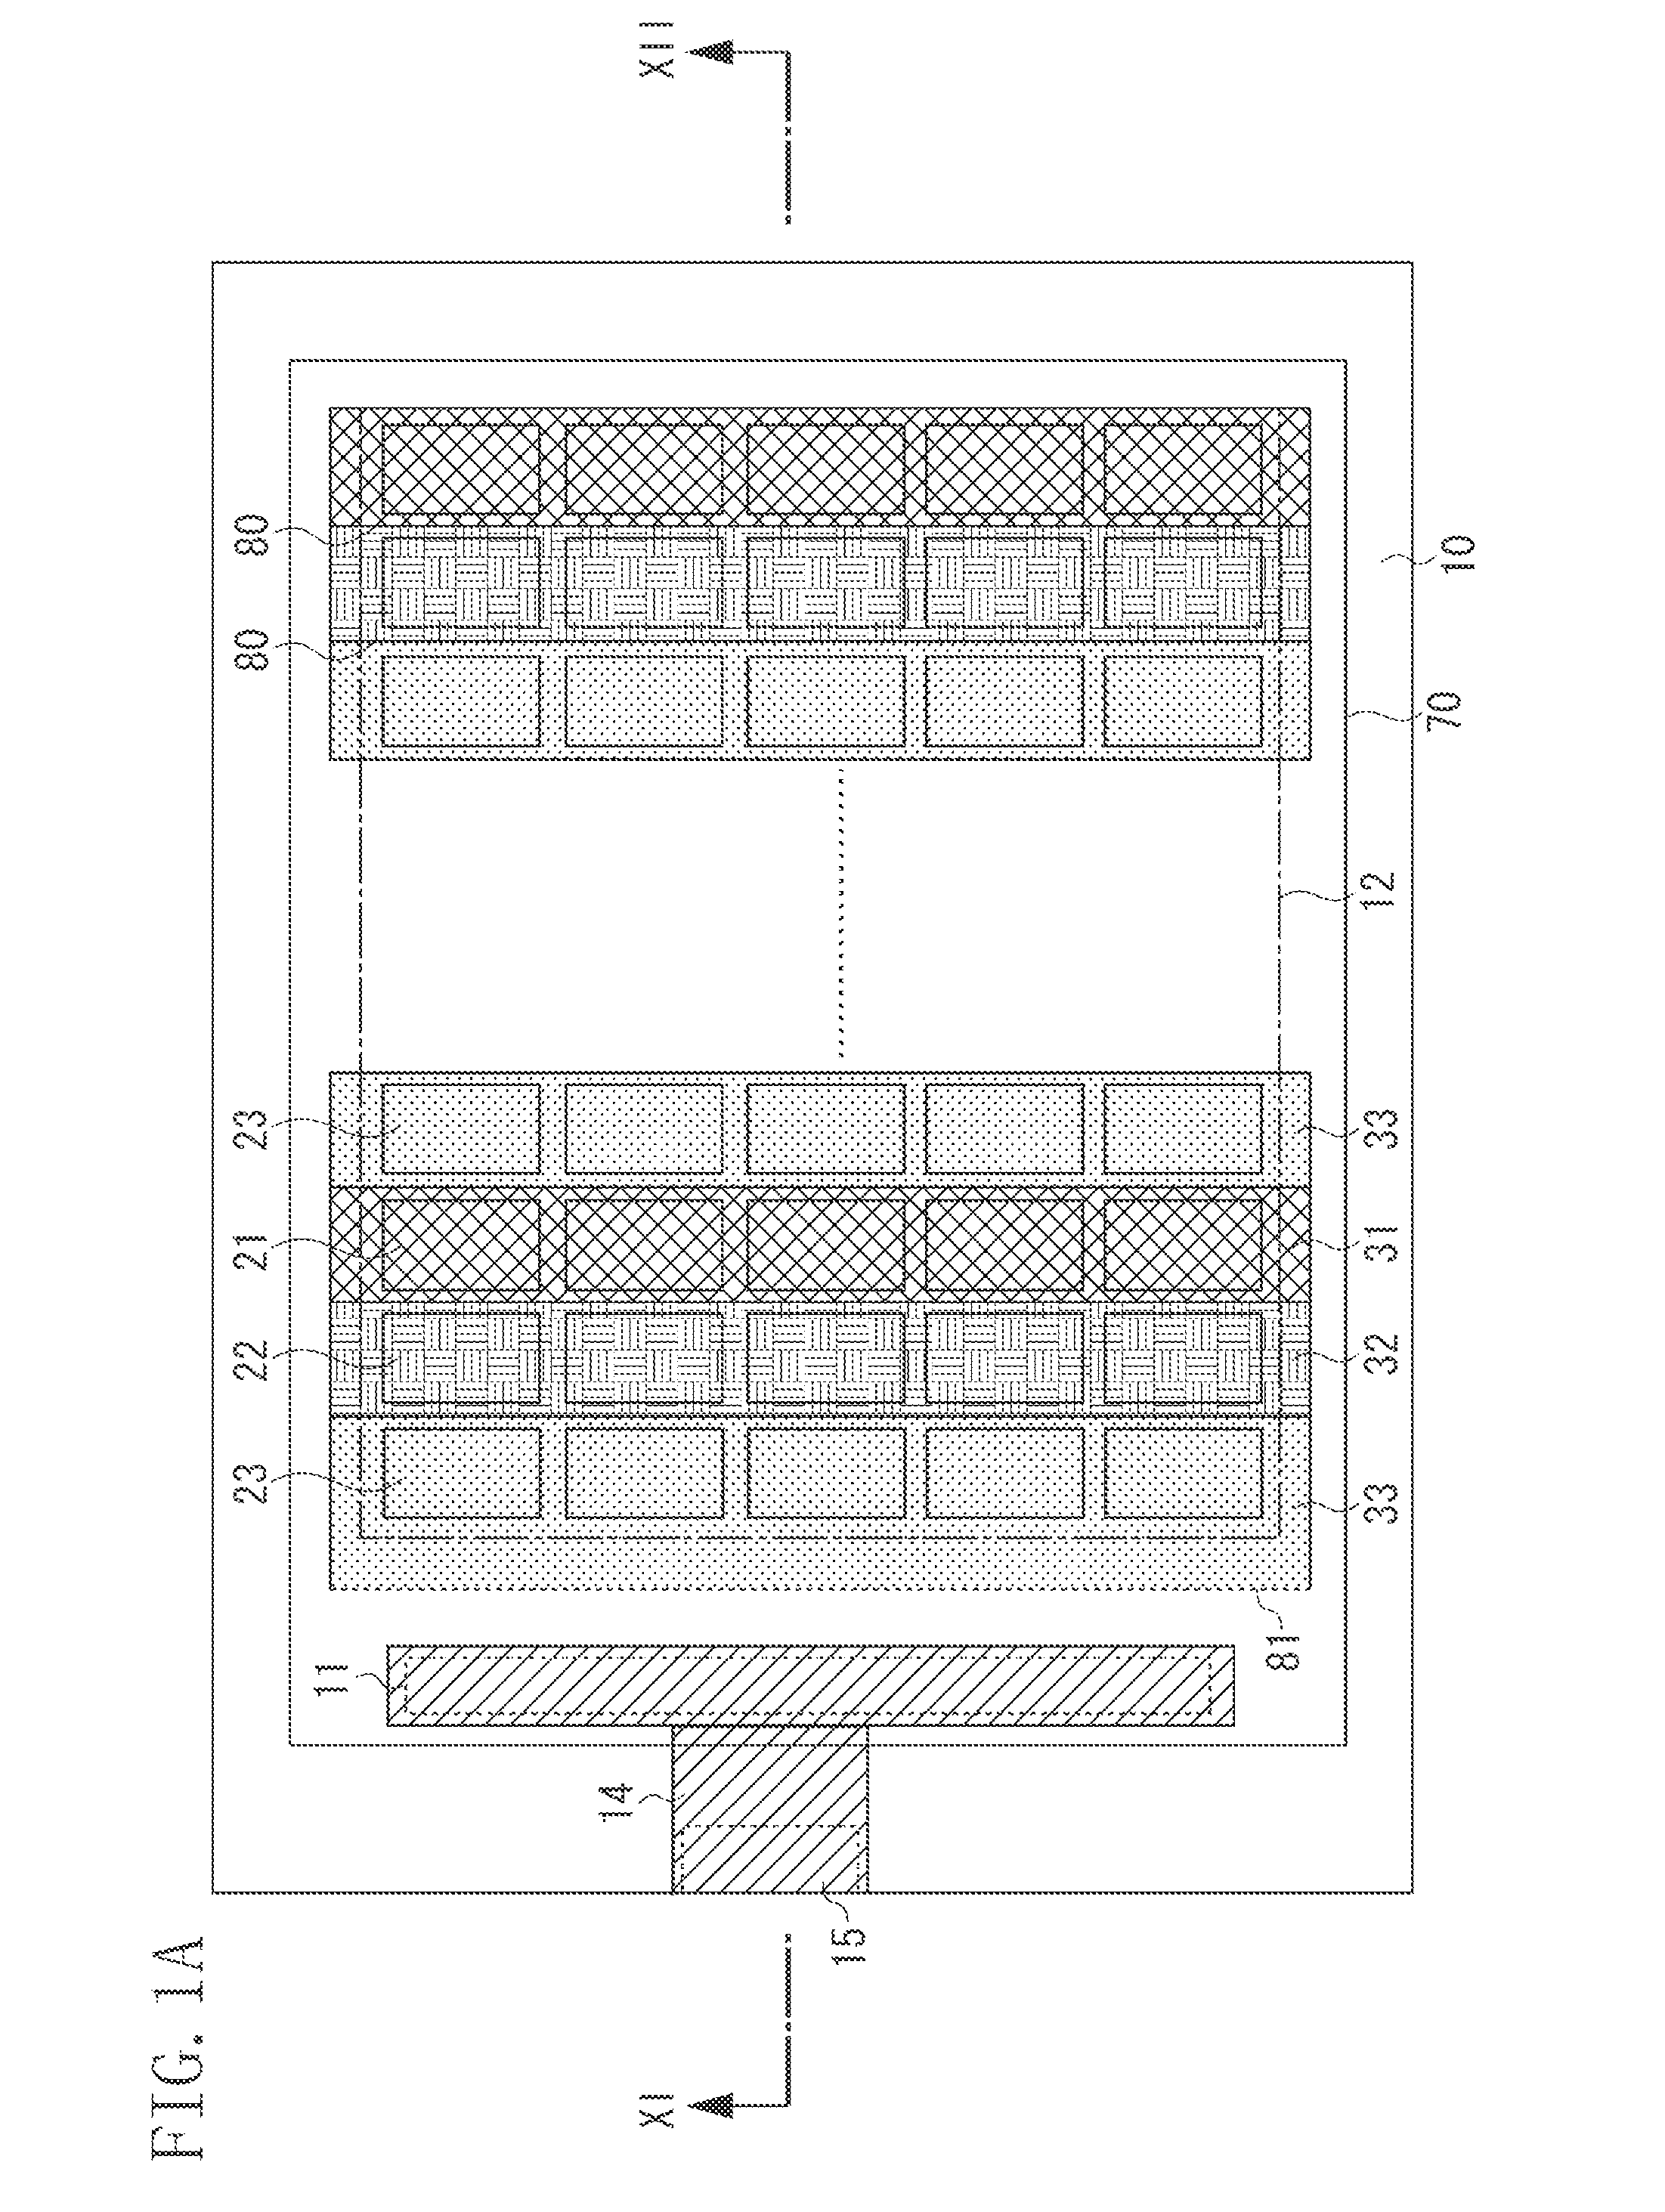 Organic luminescent device and method for manufacturing the same